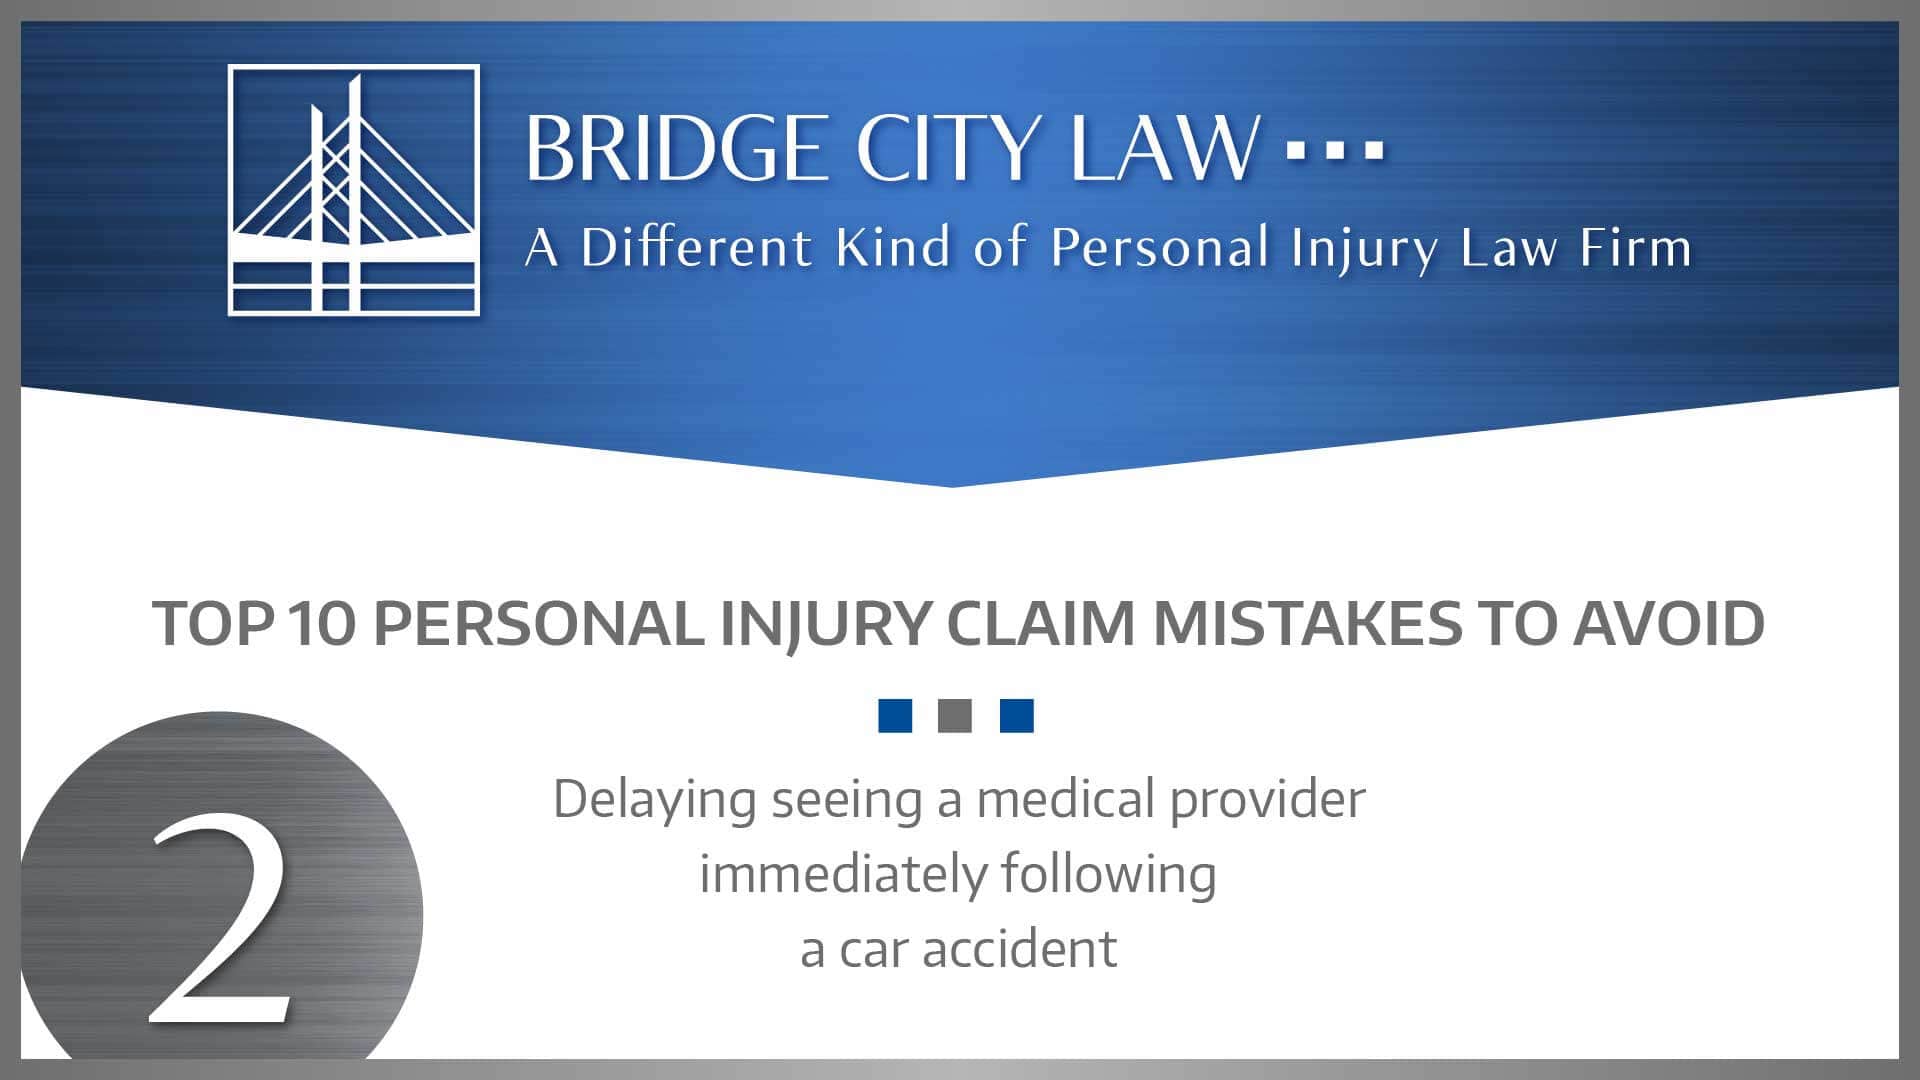 #2 MISTAKE: Delaying seeing a medical provider immediately following a car accident.